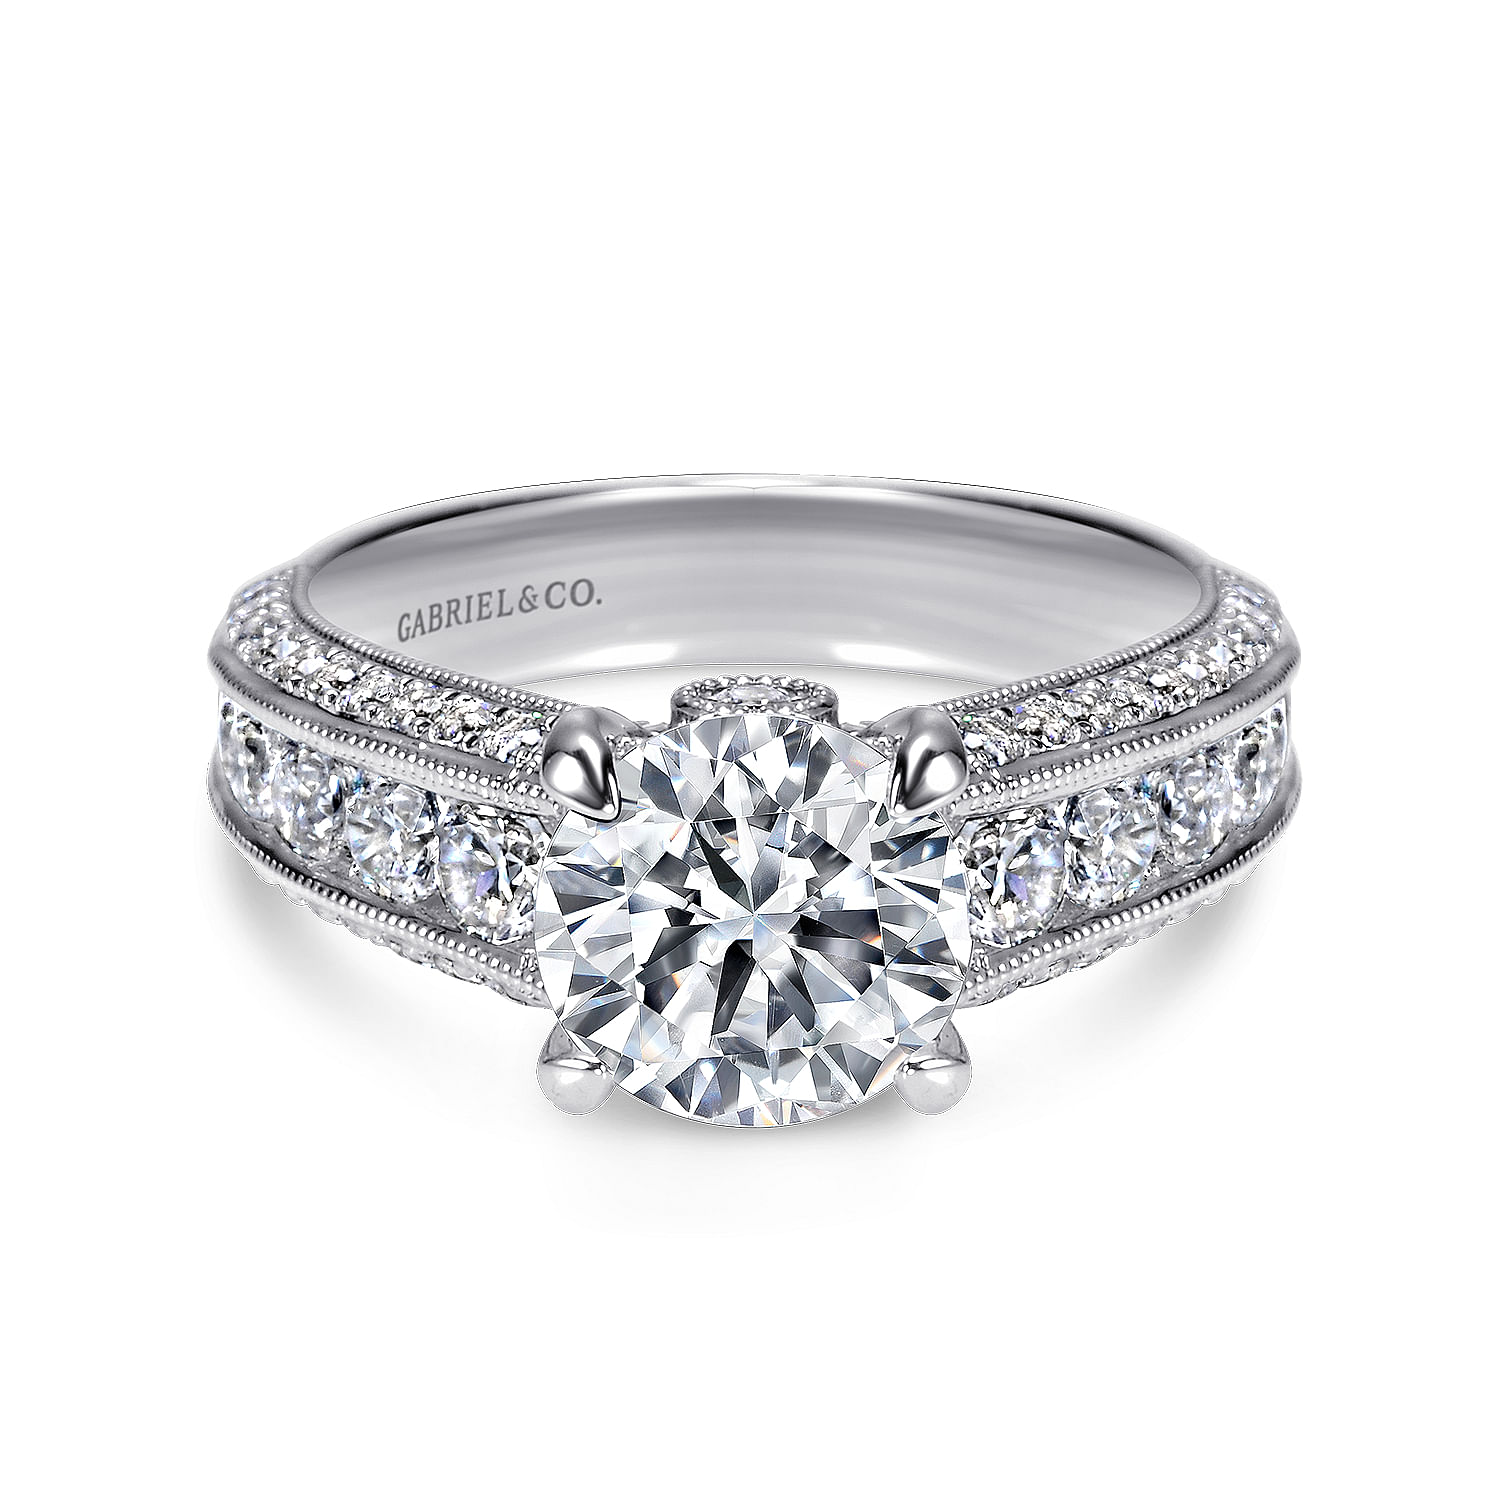 Rebecca - Vintage Inspired 14K White Gold Round Wide Band Diamond Engagement Ring